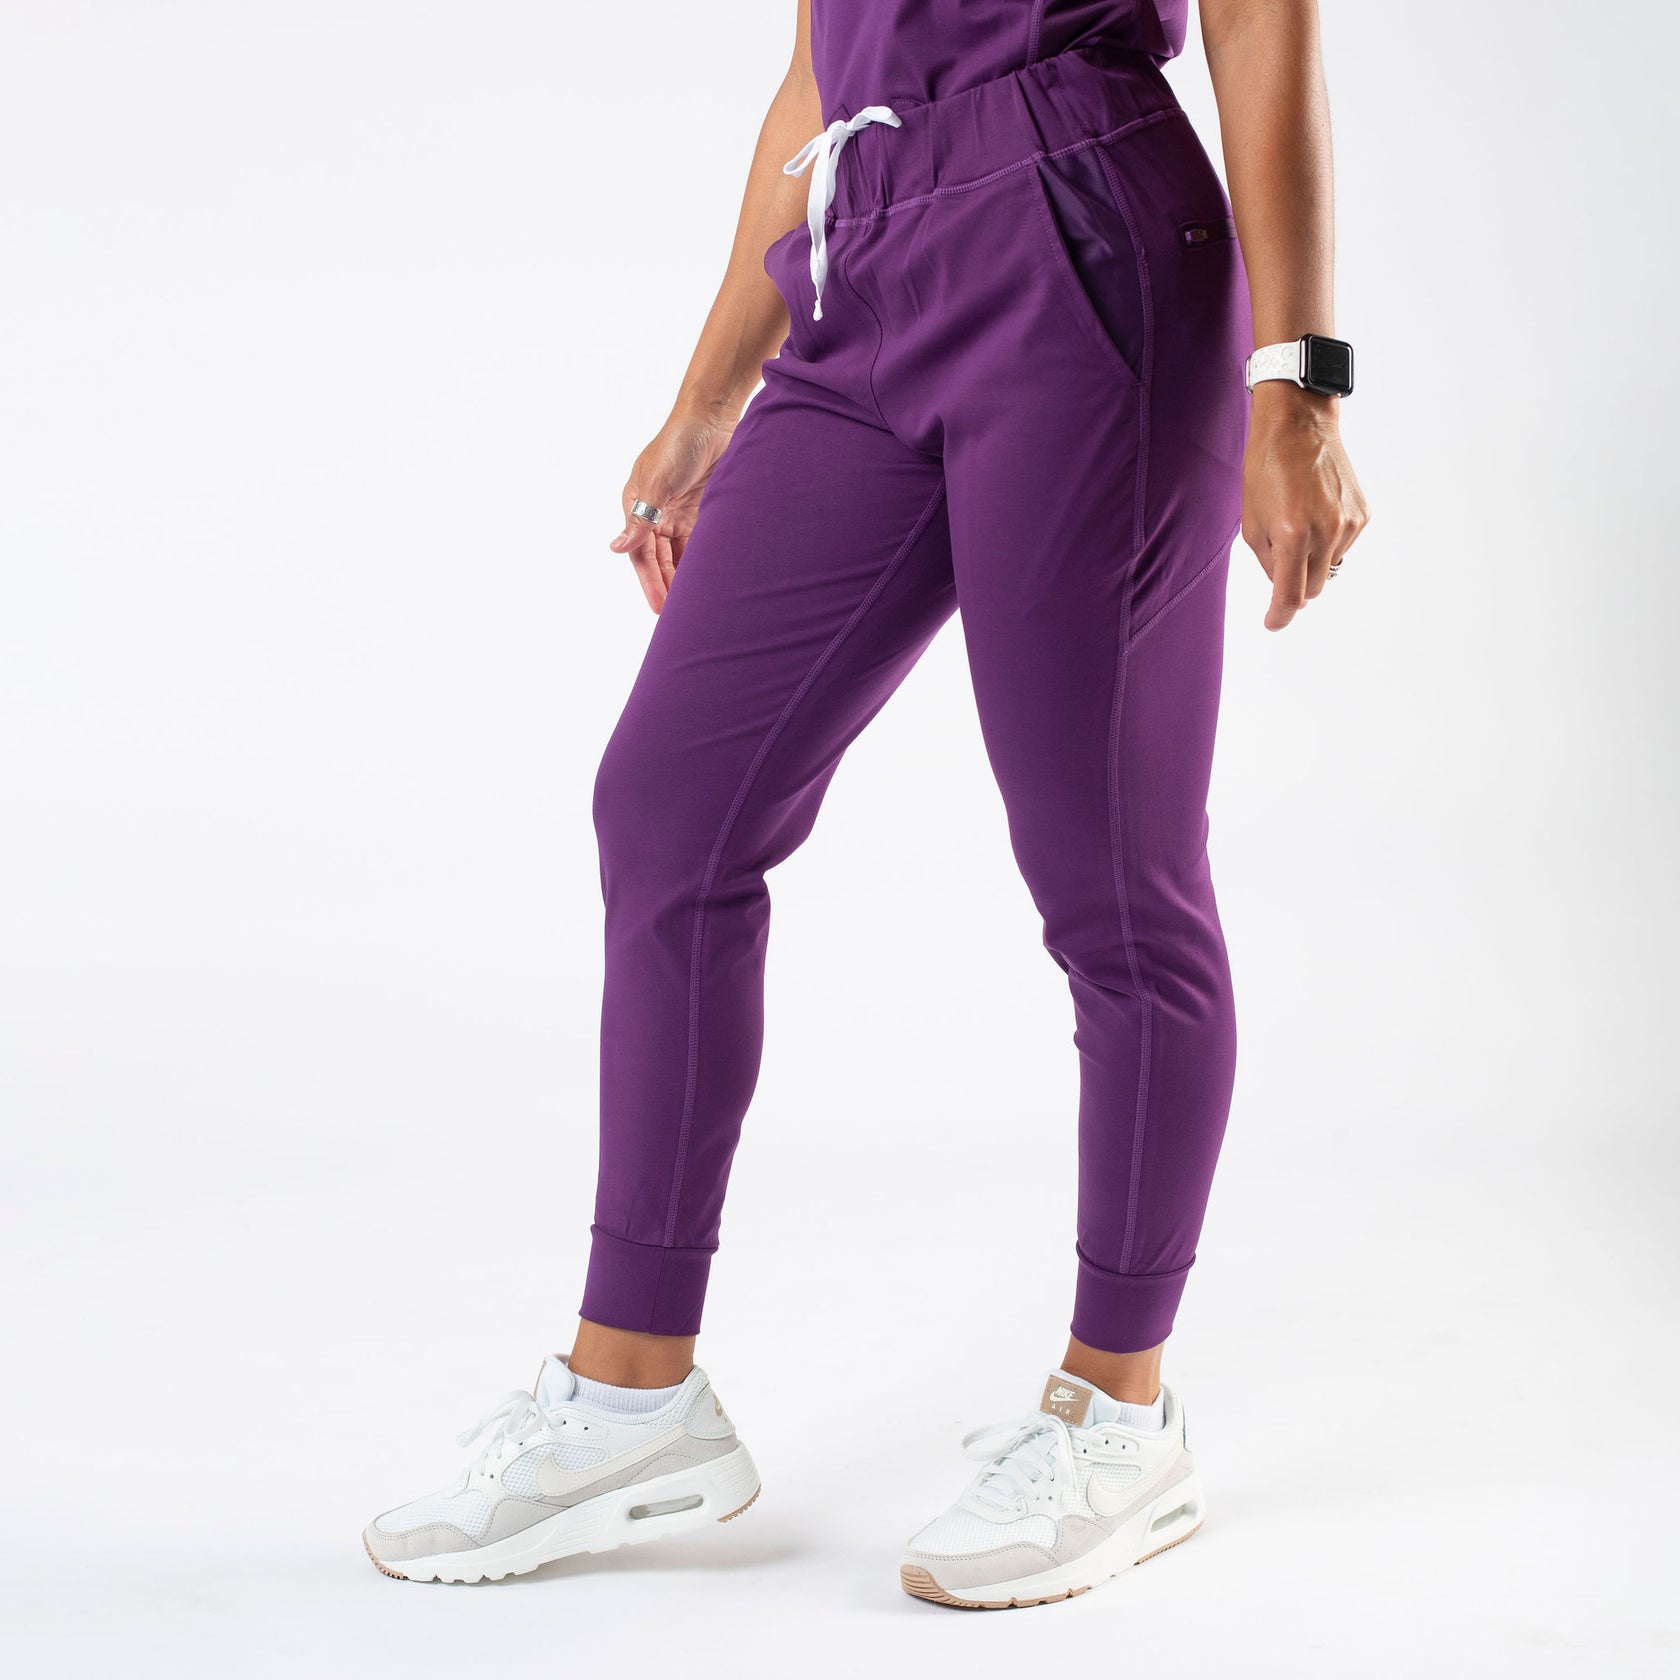 Nexus Jogger Bottom - Limited Time Colors - BeneFIT Medical